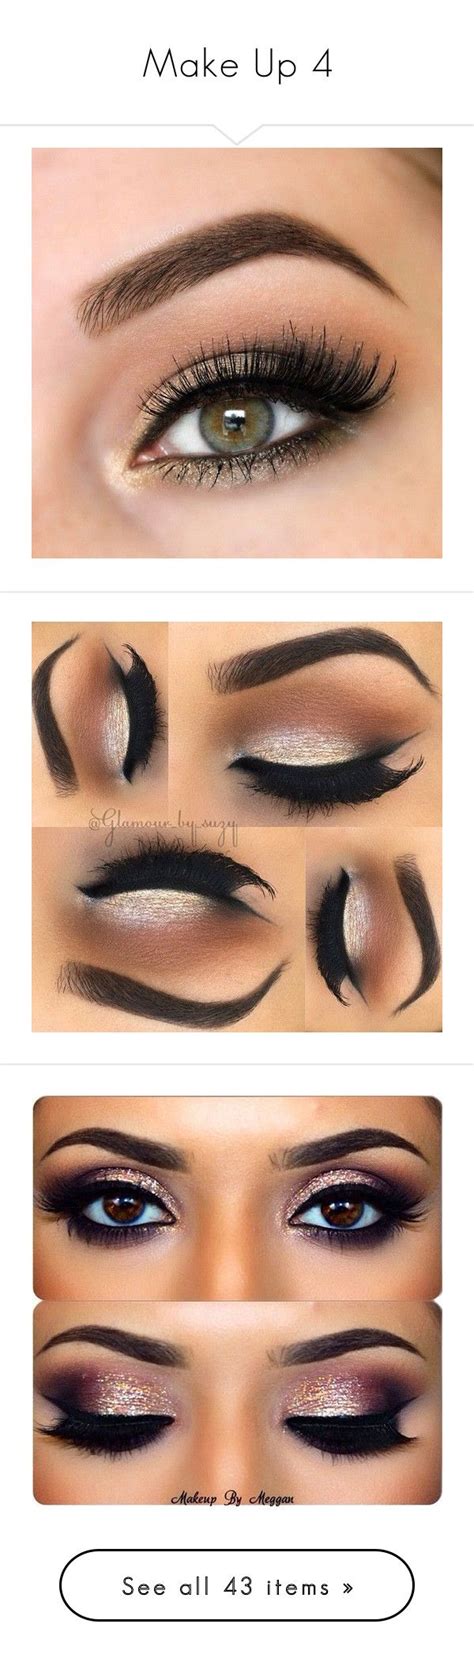 Make Up 4 By The Walking Dez Liked On Polyvore Featuring Beauty